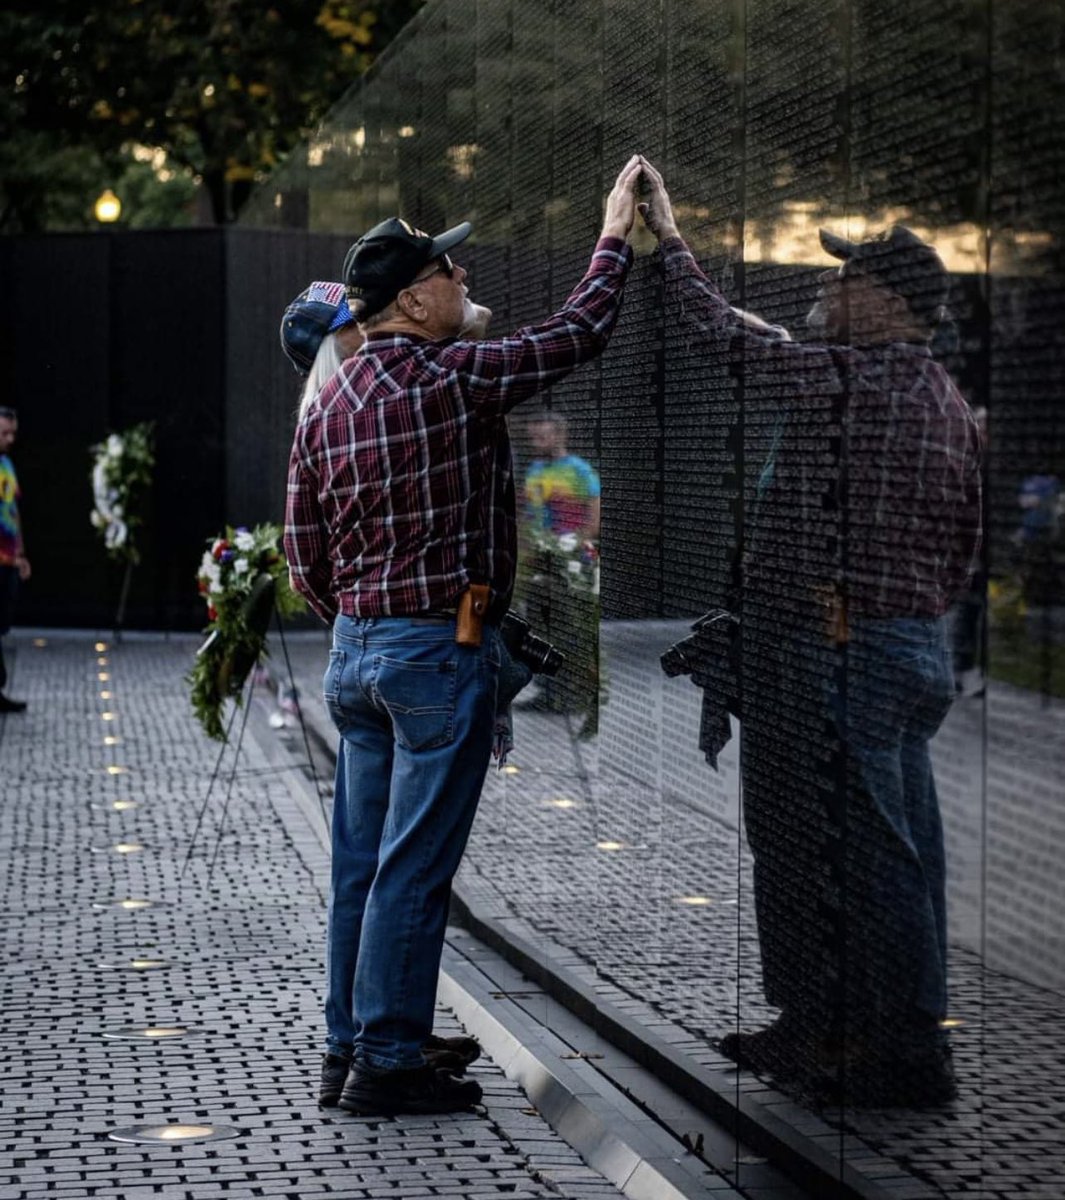 'You can hear how many men and women gave their lives but when you see the Wall with all their names, it really becomes real and makes an impact on you.'